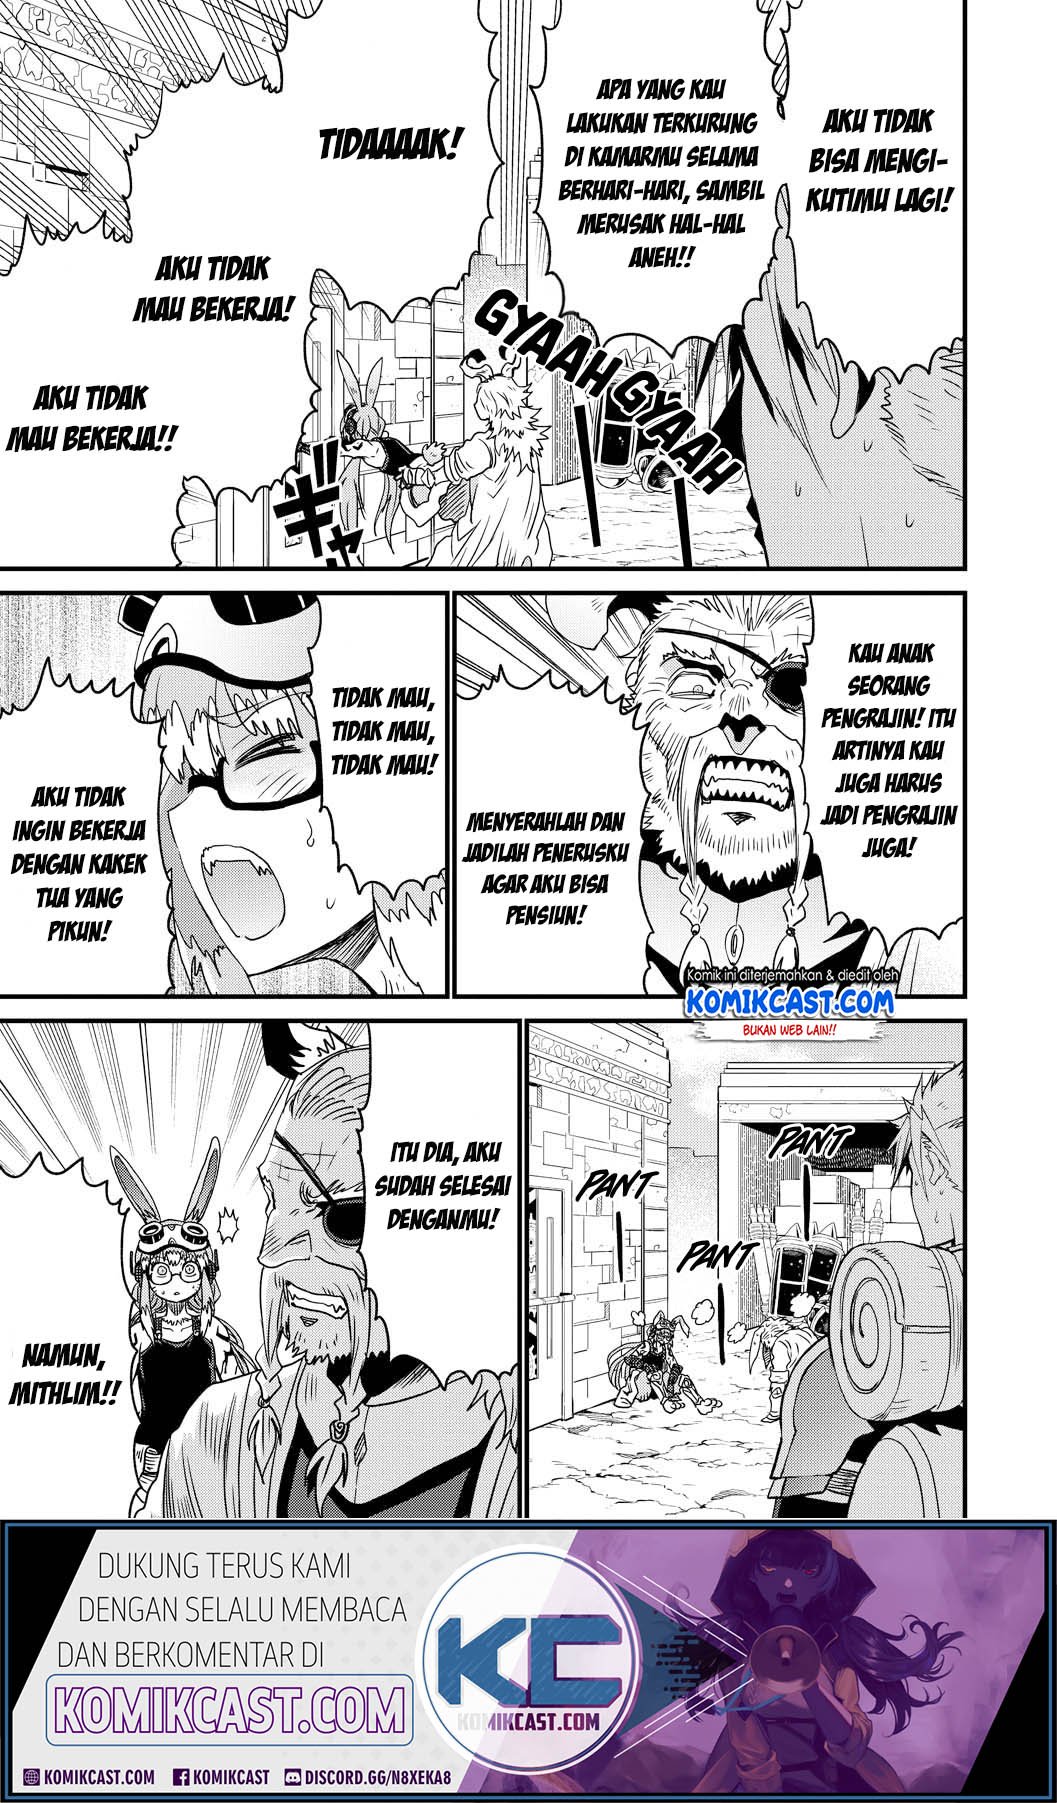 Peter Grill to Kenja no Jikan Chapter 23